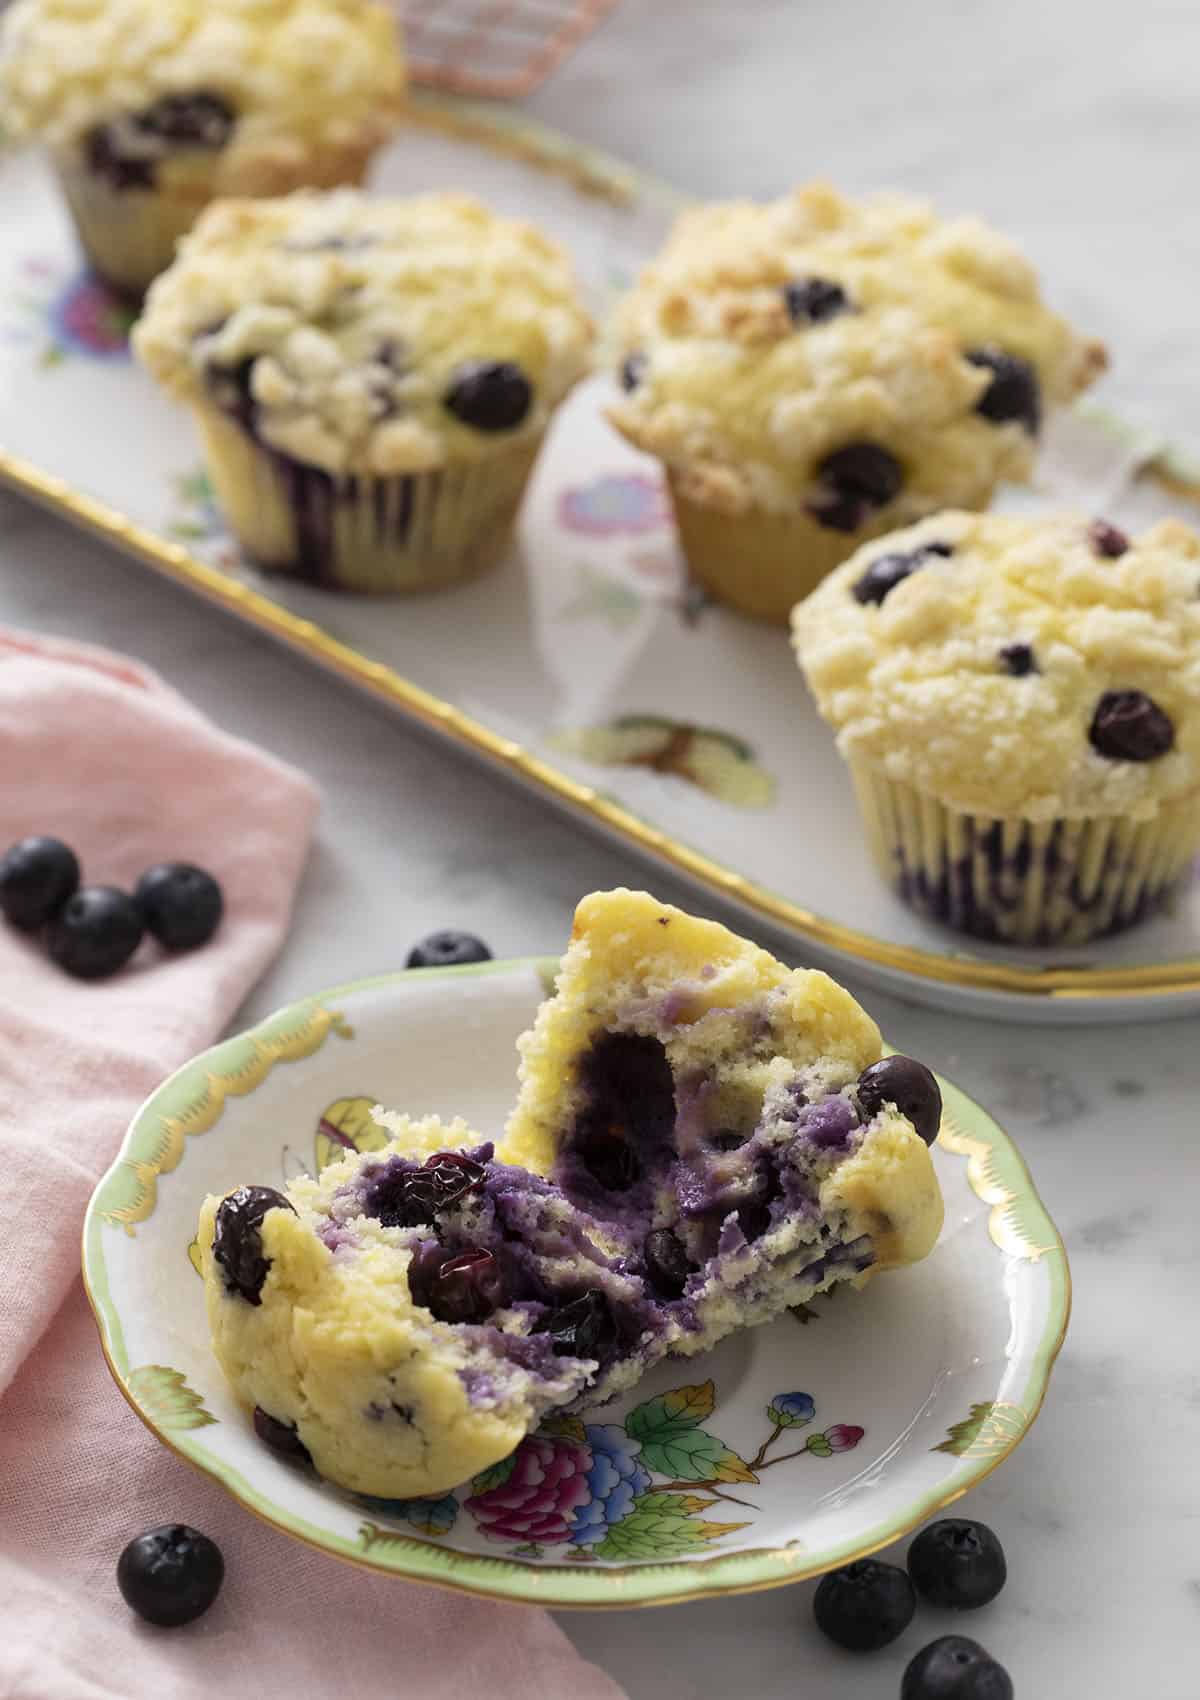 A blueberry muffin torn in half revealing a berry-filled interior.